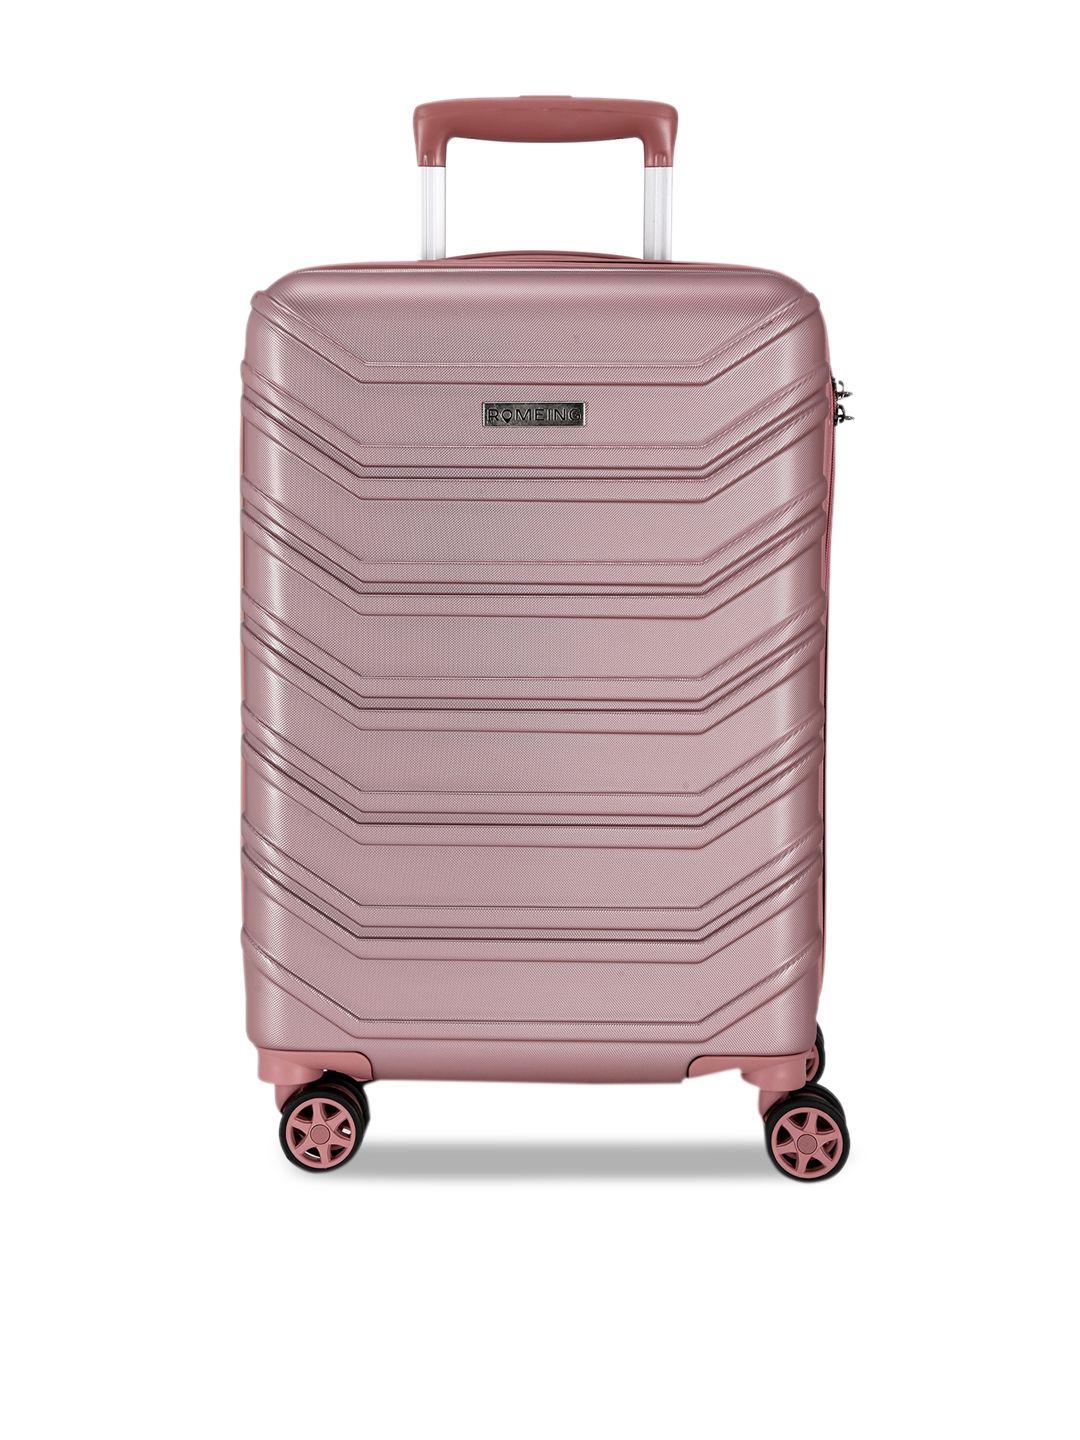 romeing monopoli rose gold textured hard-sided polycarbonate cabin trolley suitcase